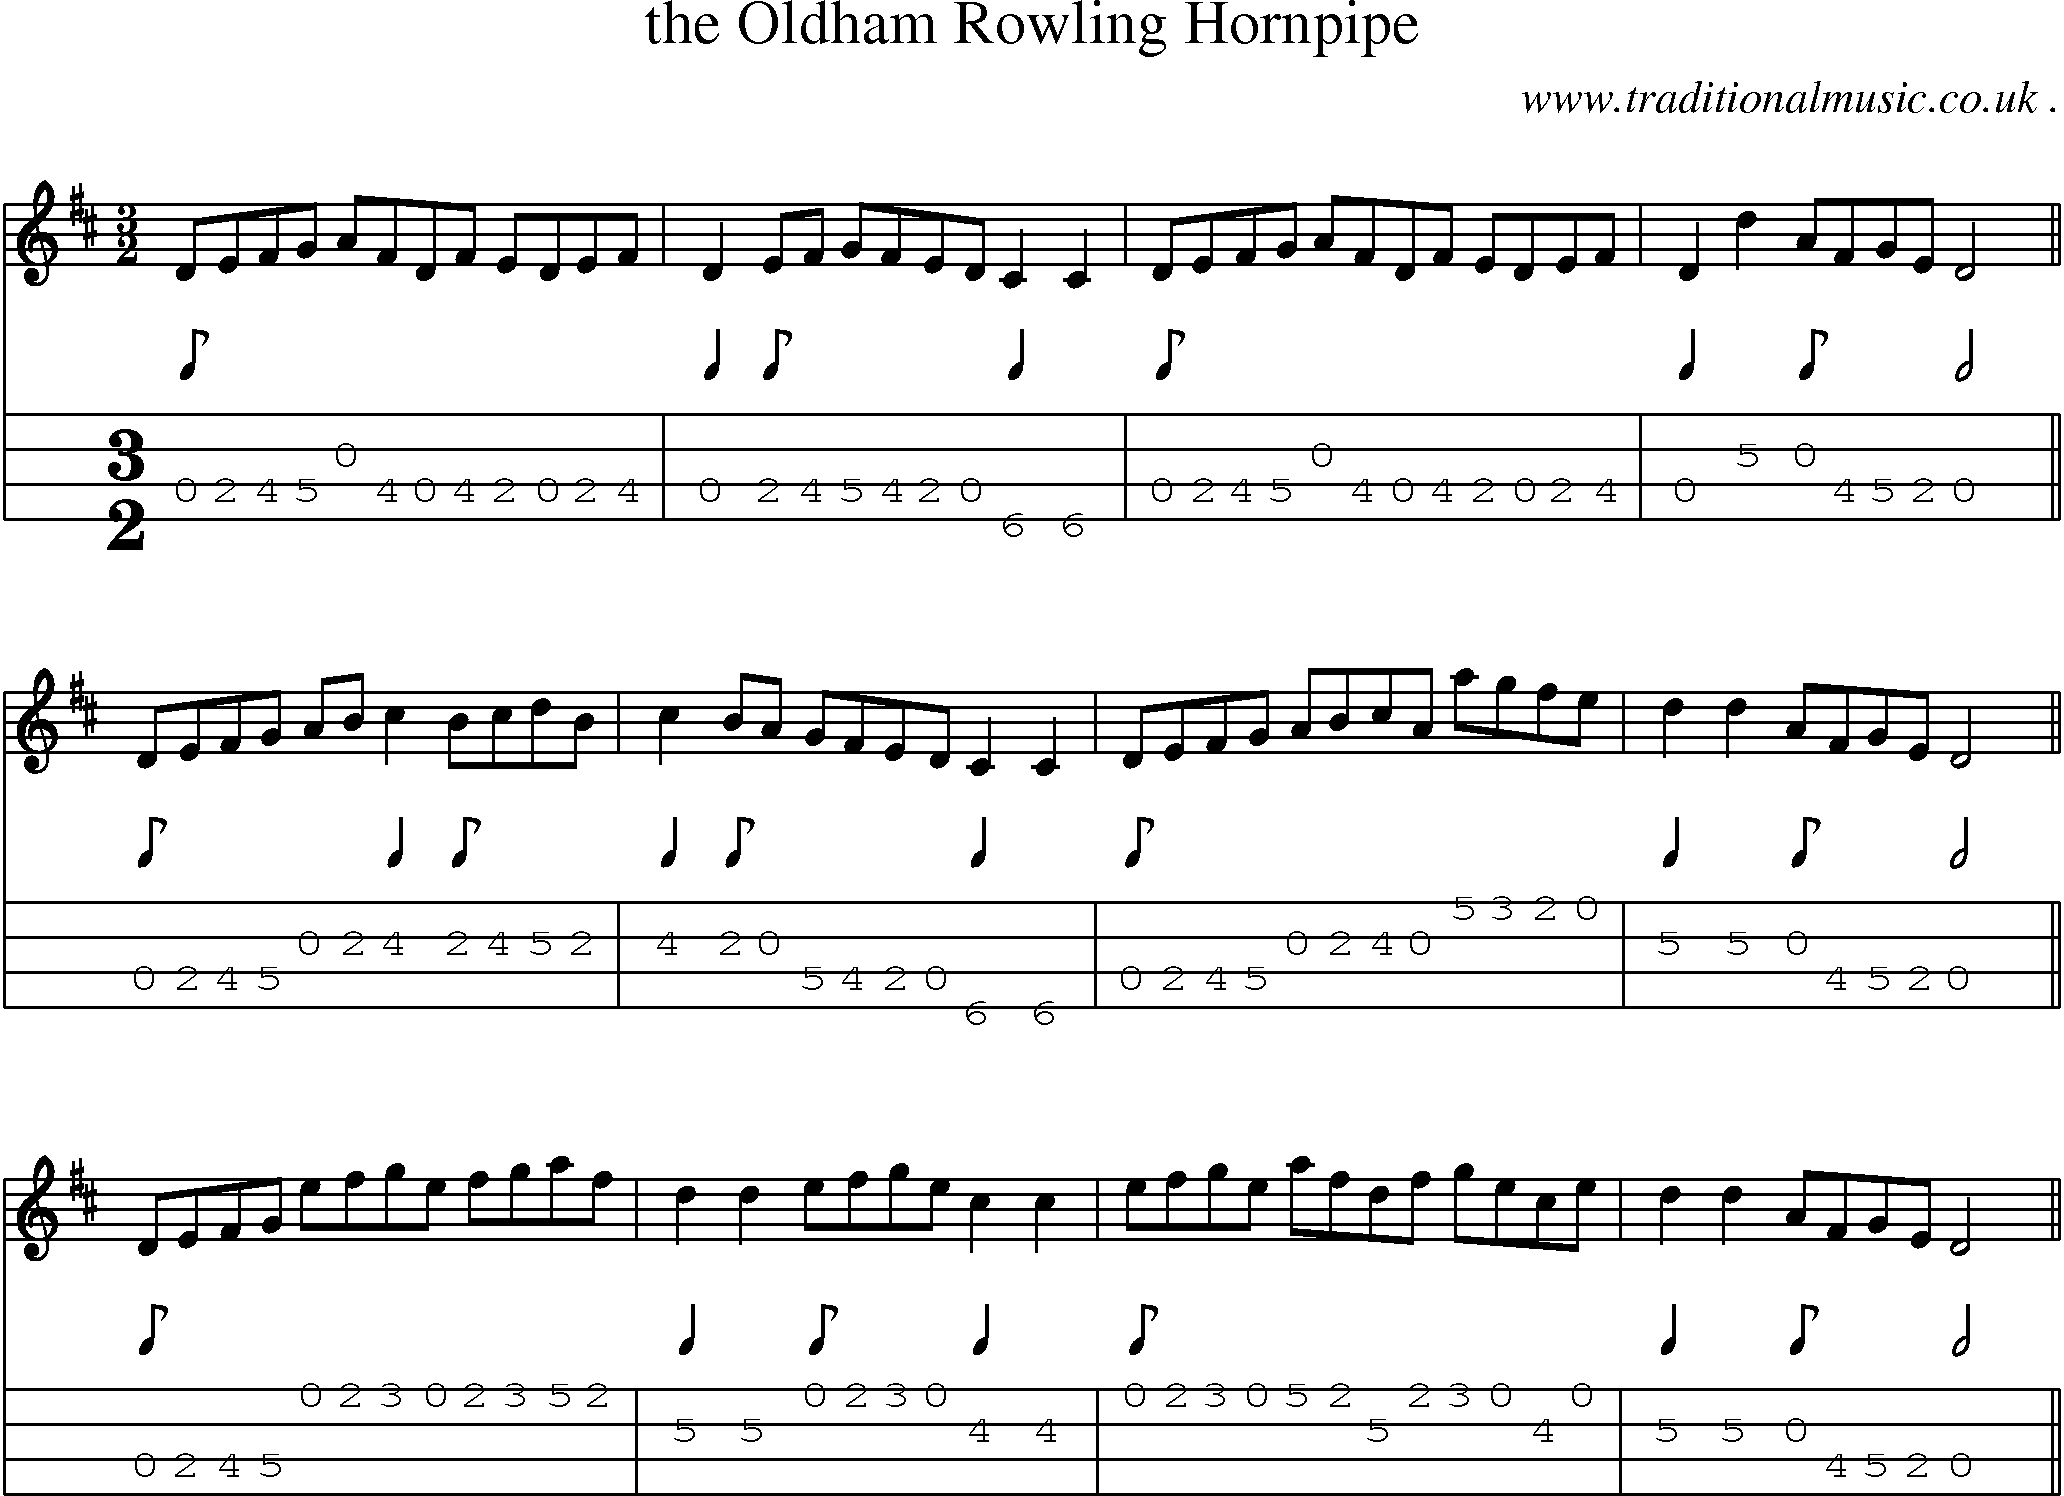 Sheet-Music and Mandolin Tabs for The Oldham Rowling Hornpipe